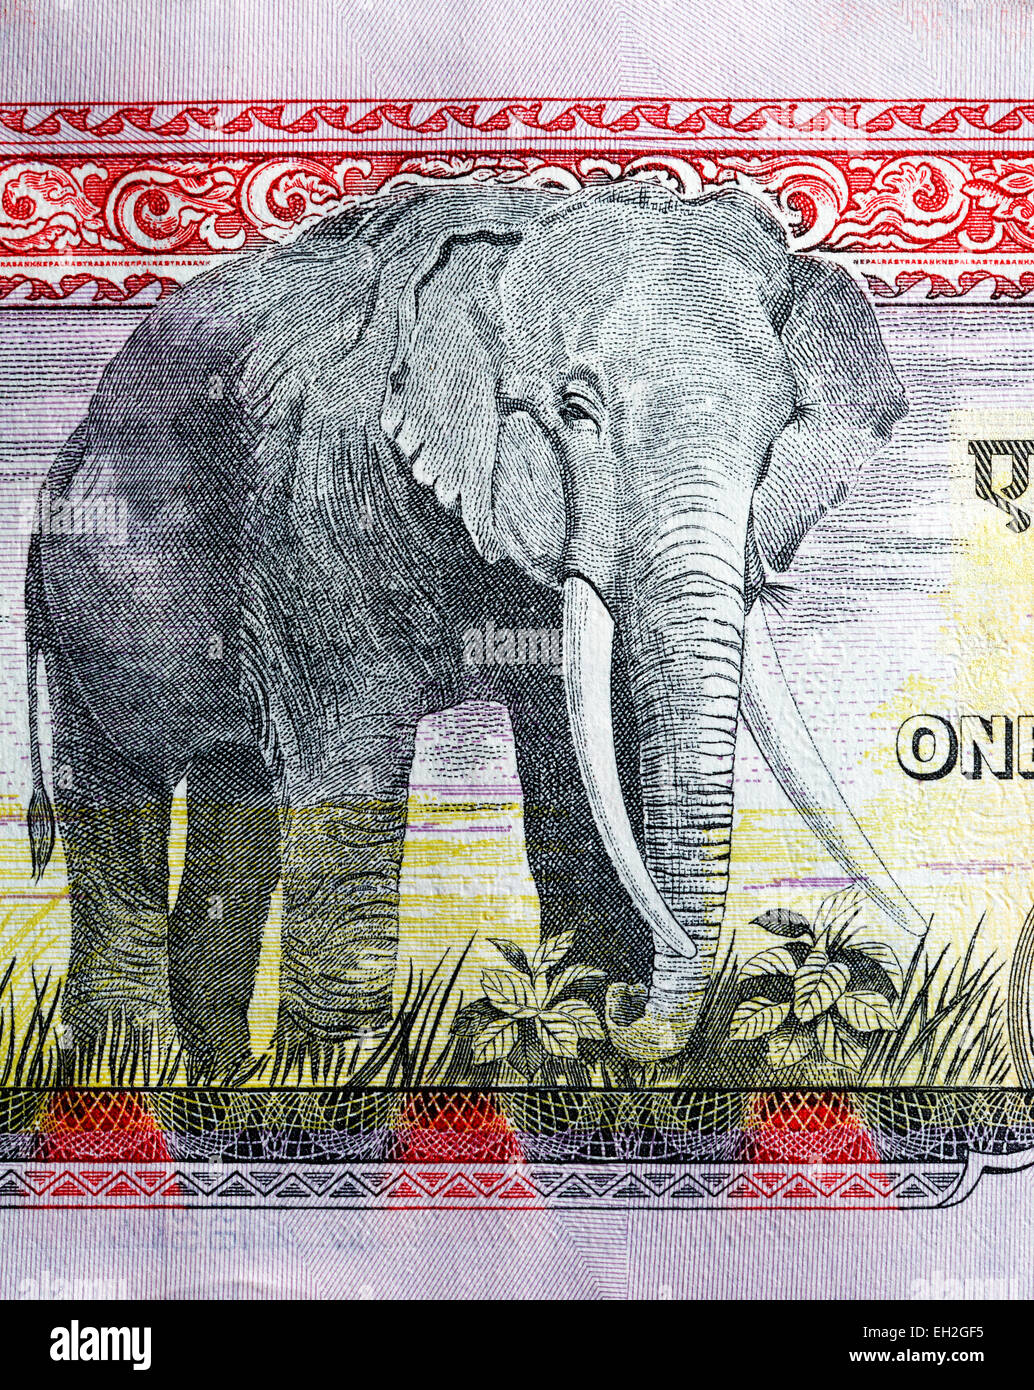 Elephant from 1000 rupees banknote, Nepal, 2008 Stock Photo